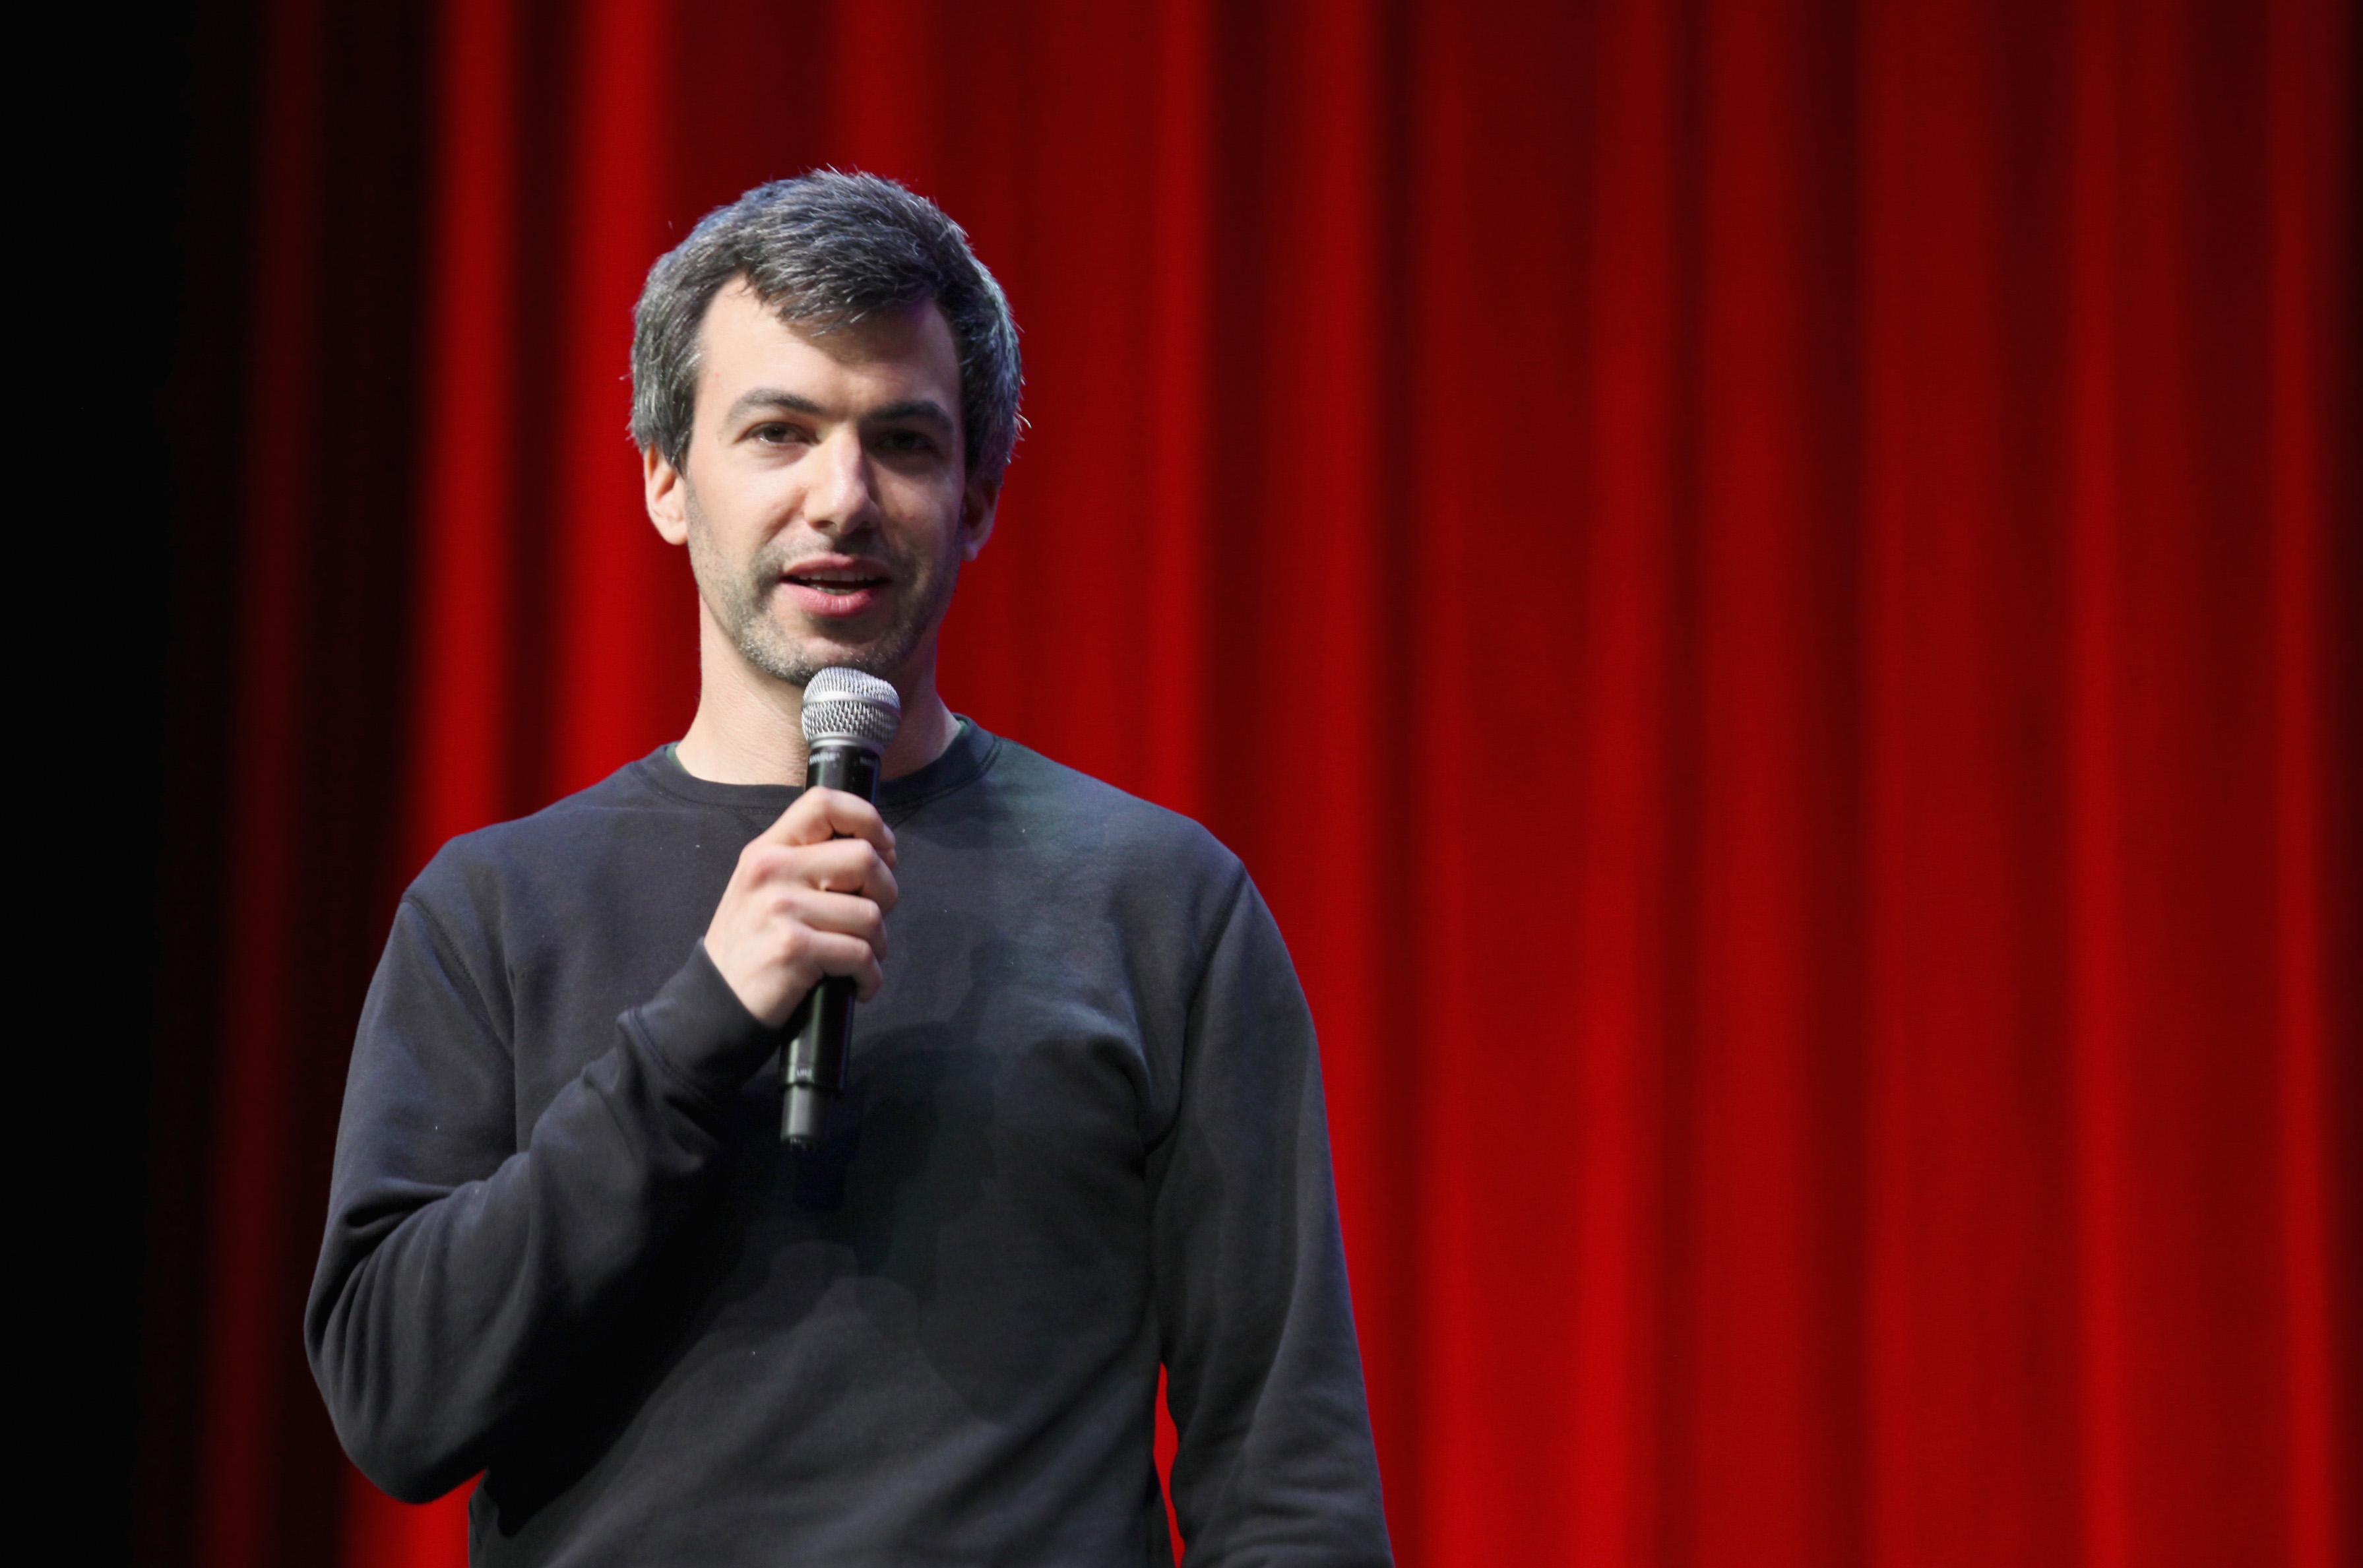 Nathan Fielder at Civic Center Plaza and The Bill Graham Civic Auditorium on June 2, 2018, in San Francisco, California. | Source: Getty Images